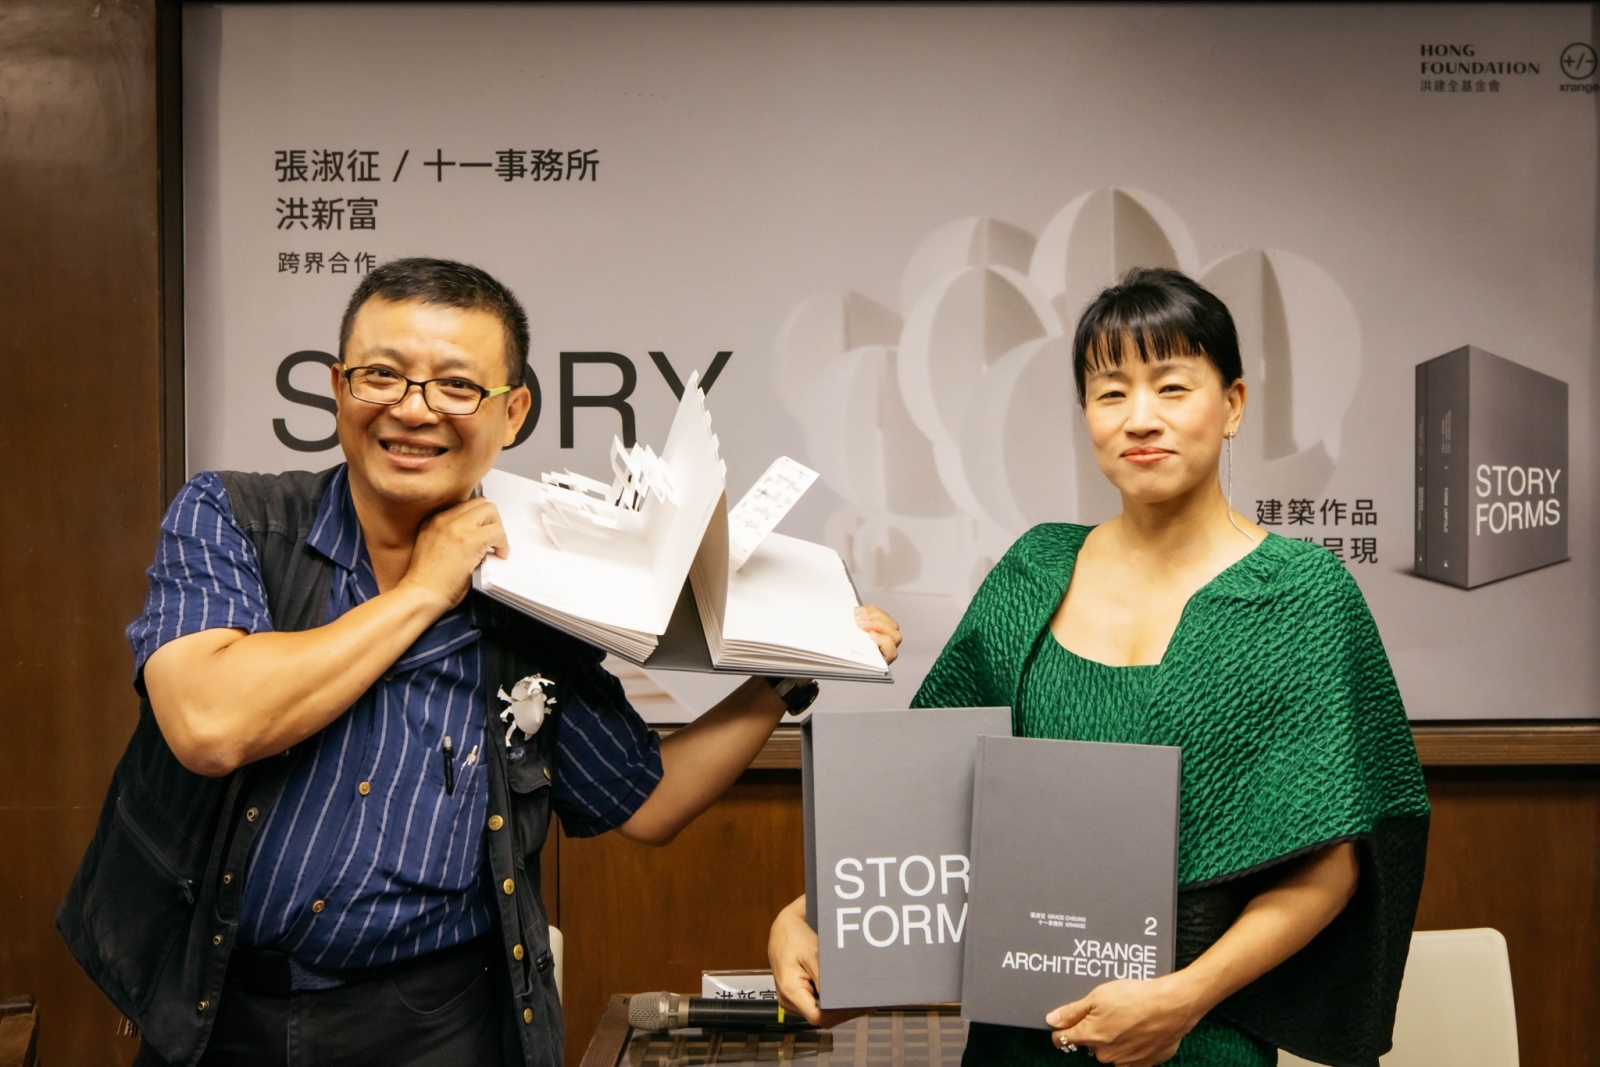 Writing by Greac Cheung, the book "STORY FORMS" was published